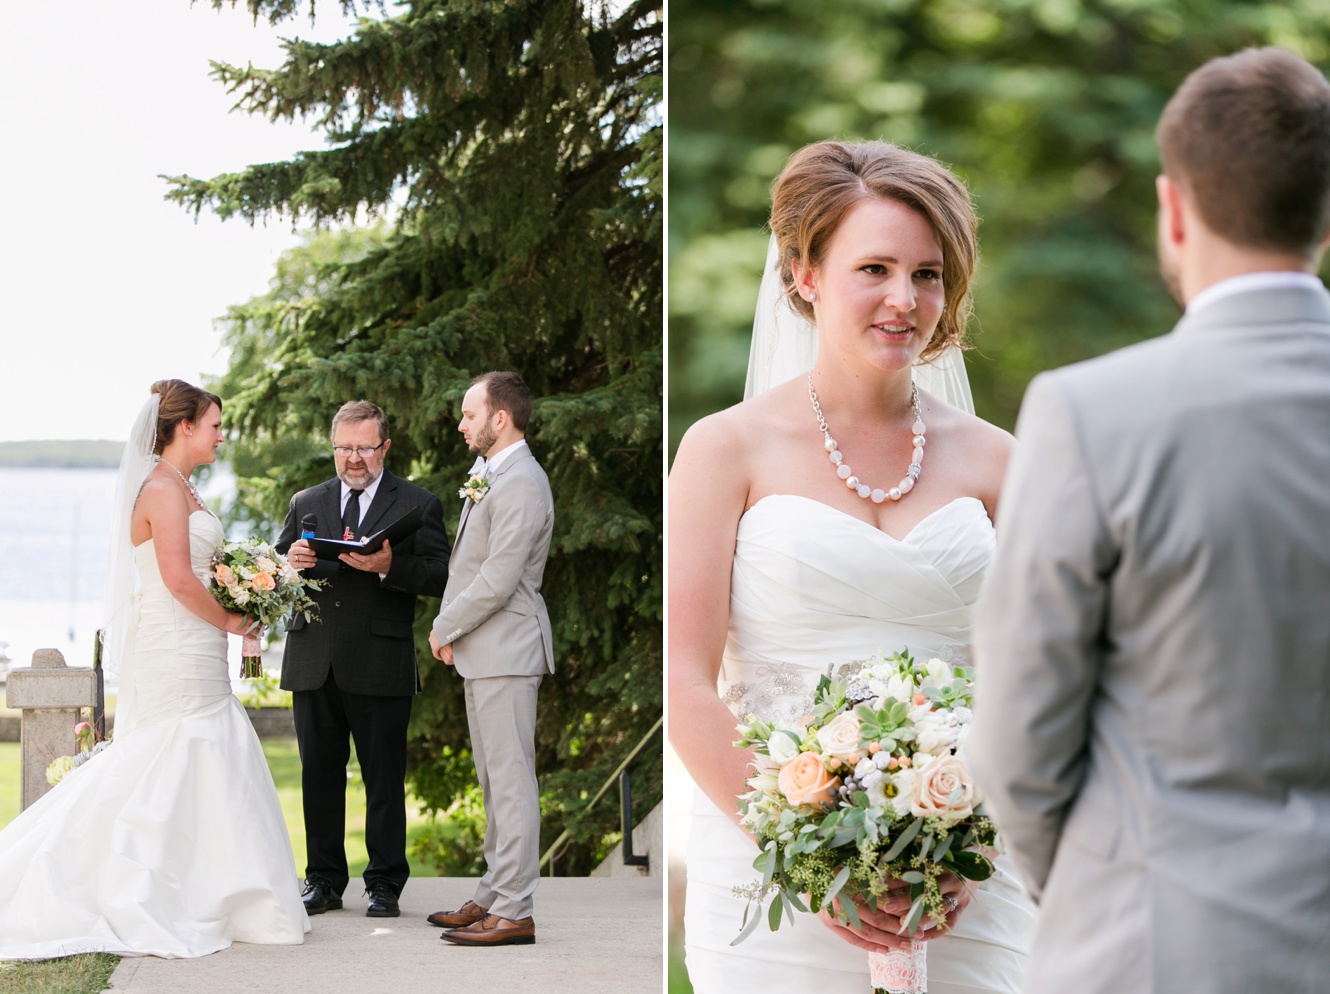 Lakeside outdoor wedding ceremony pictures at The Chalet in Kenosee Lake